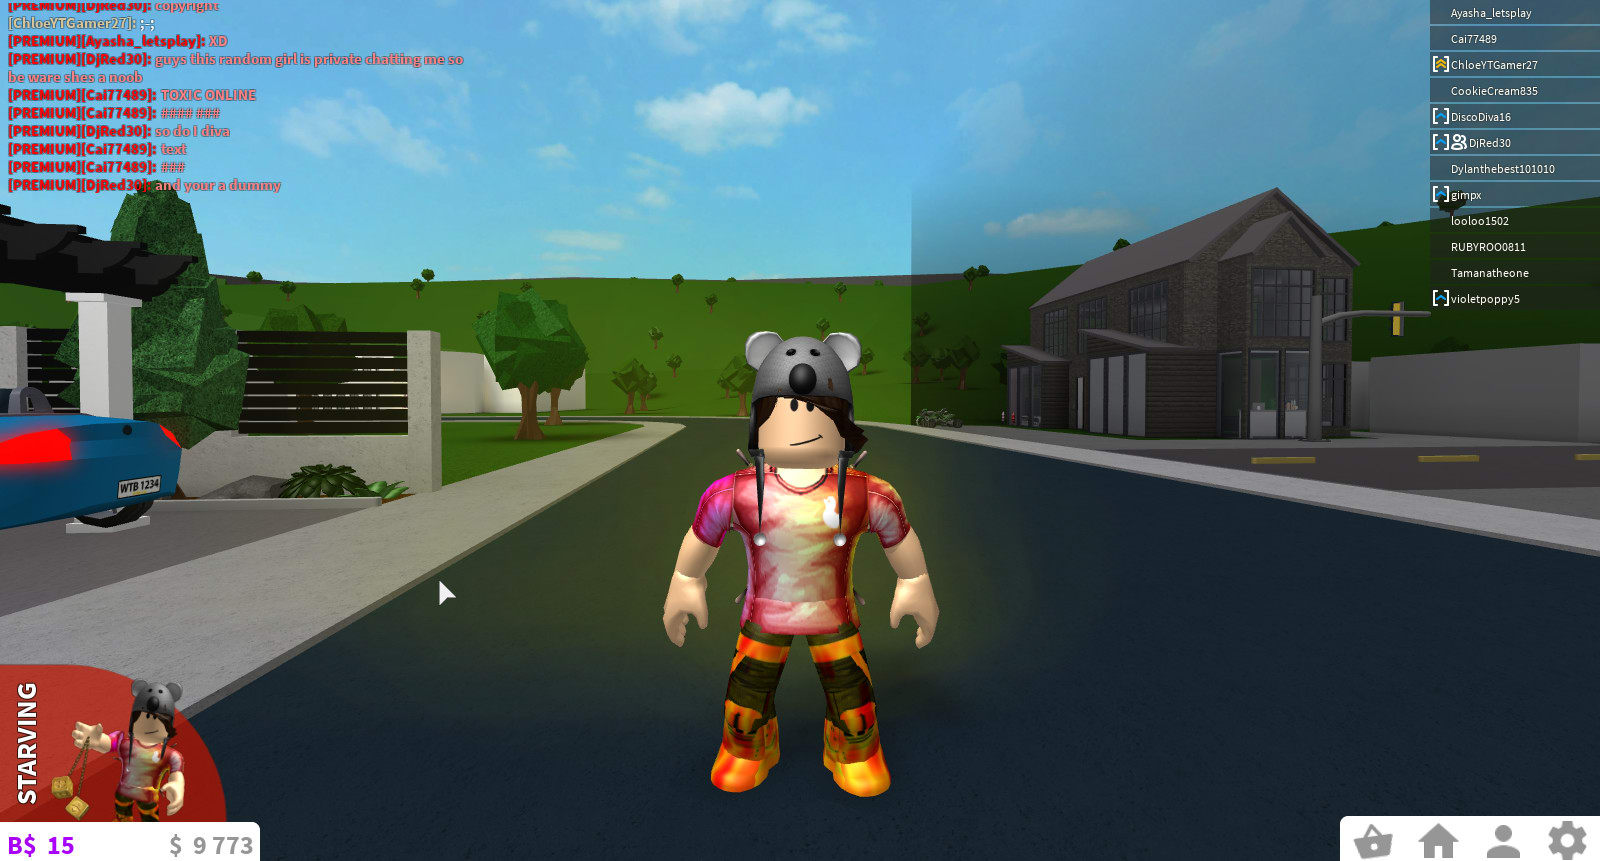 Play Roblox With You For An Hour By Dylanthebest10 - noob 1234 roblox